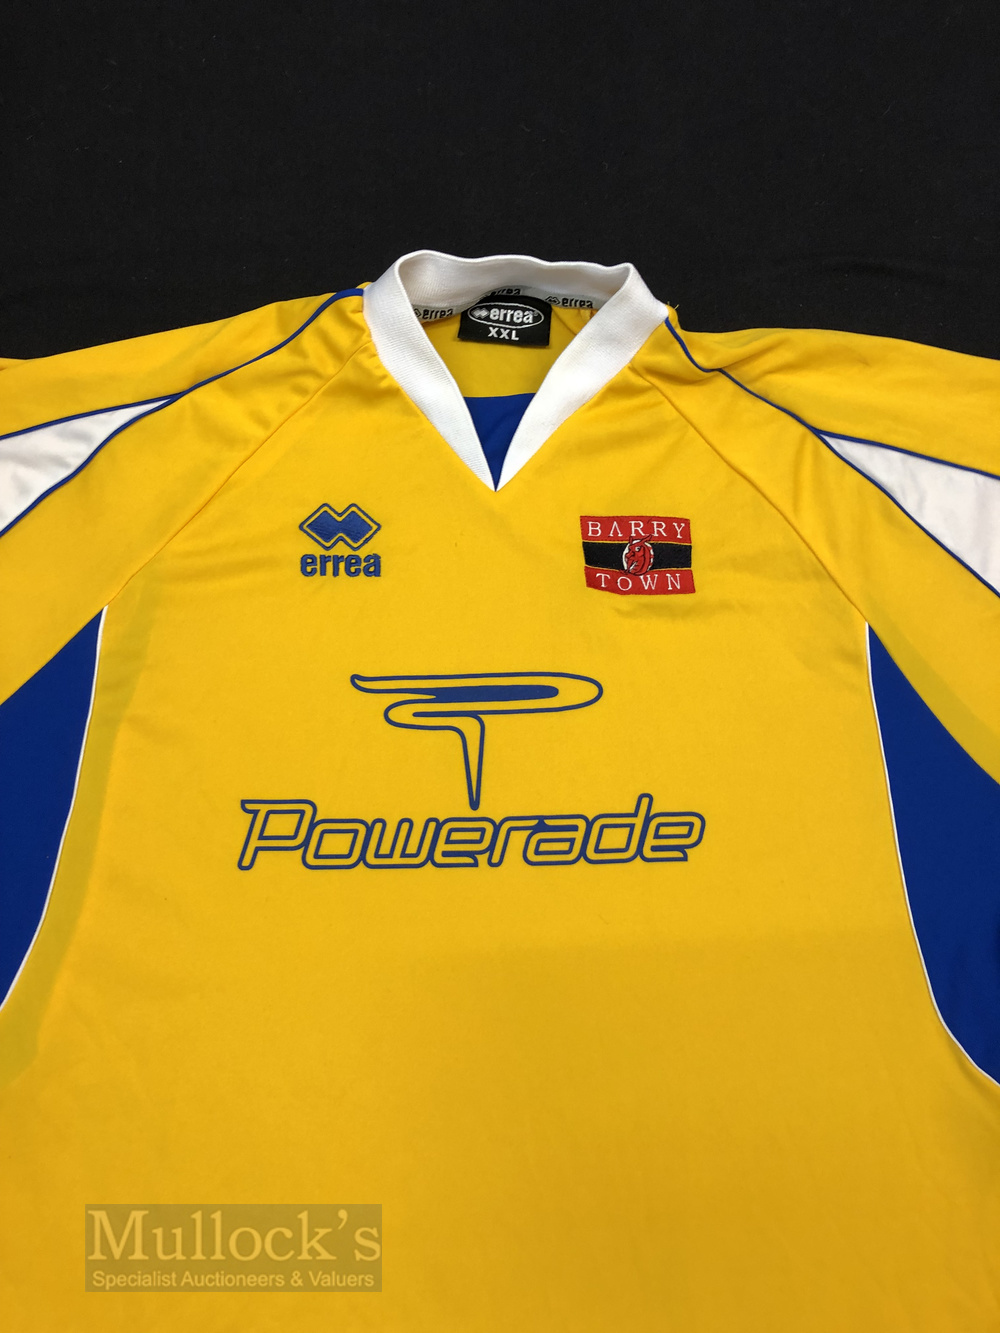 2003/04 Barry Town Home football shirt size XXL, in yellow and blue, Errea, short sleeve - Image 2 of 2